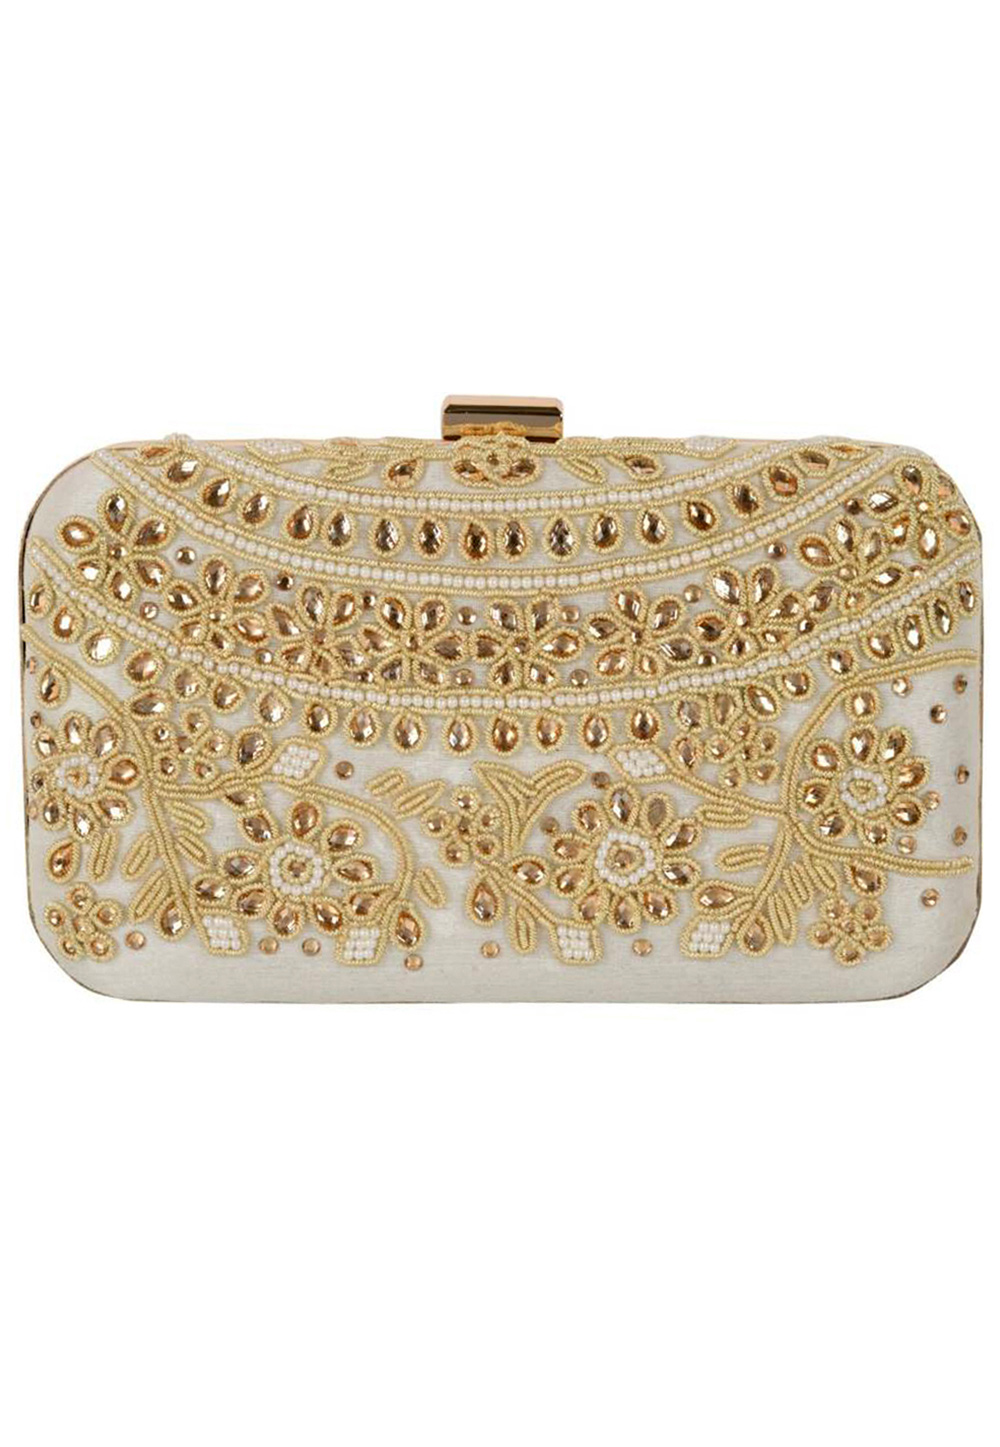 Off White Synthetic Embroidered Clutch 225839